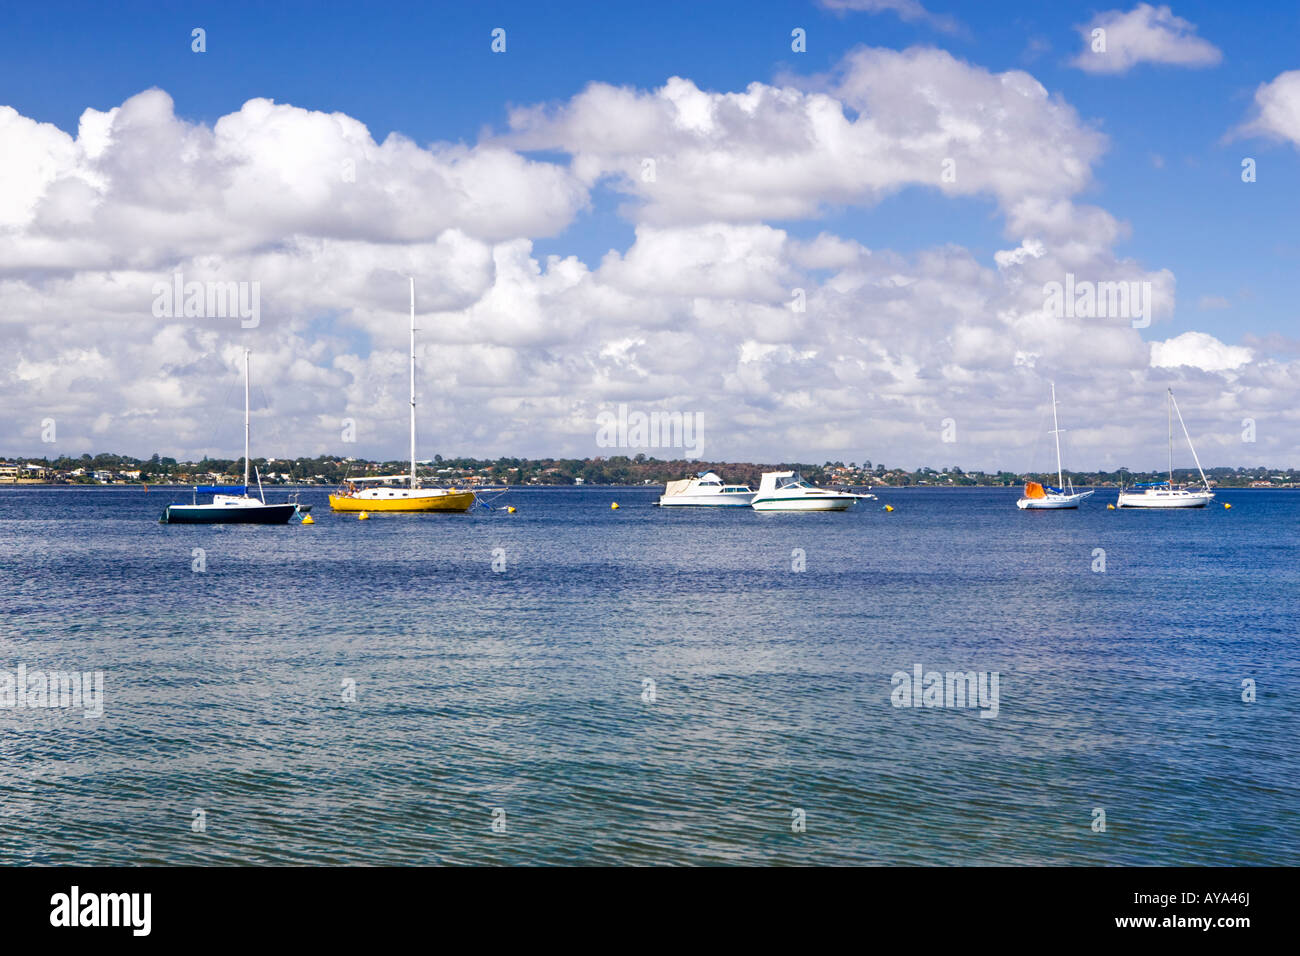 Yachts moored on the Swan River near Pelican Point, Matilda Bay, Perth, Western Australia Stock Photo